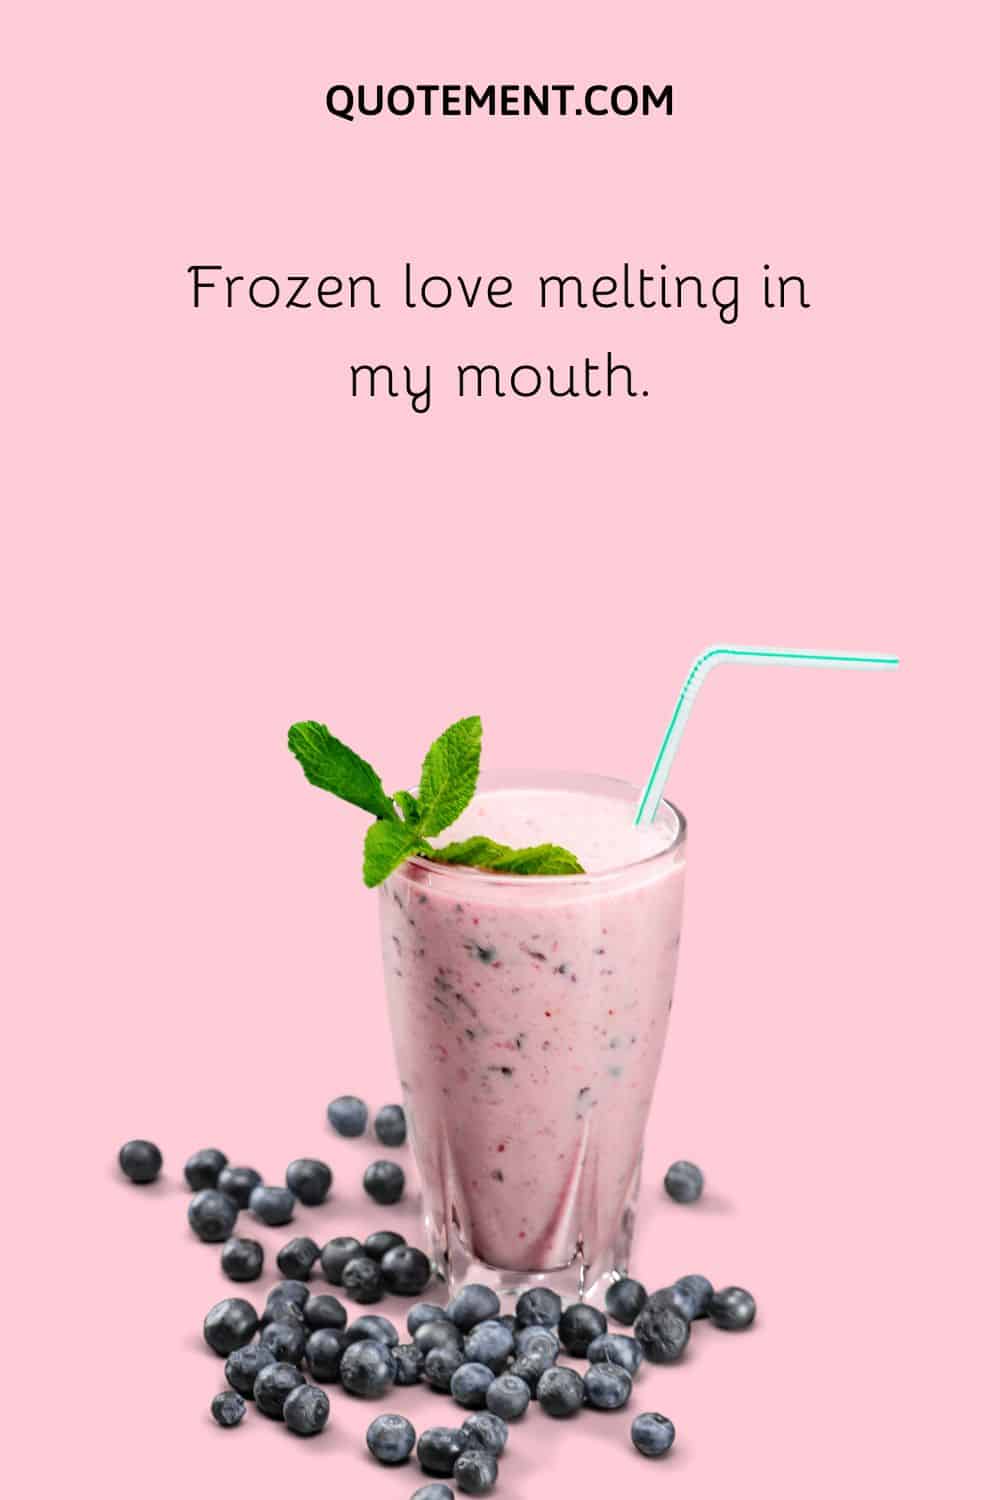 Frozen love melting in my mouth.